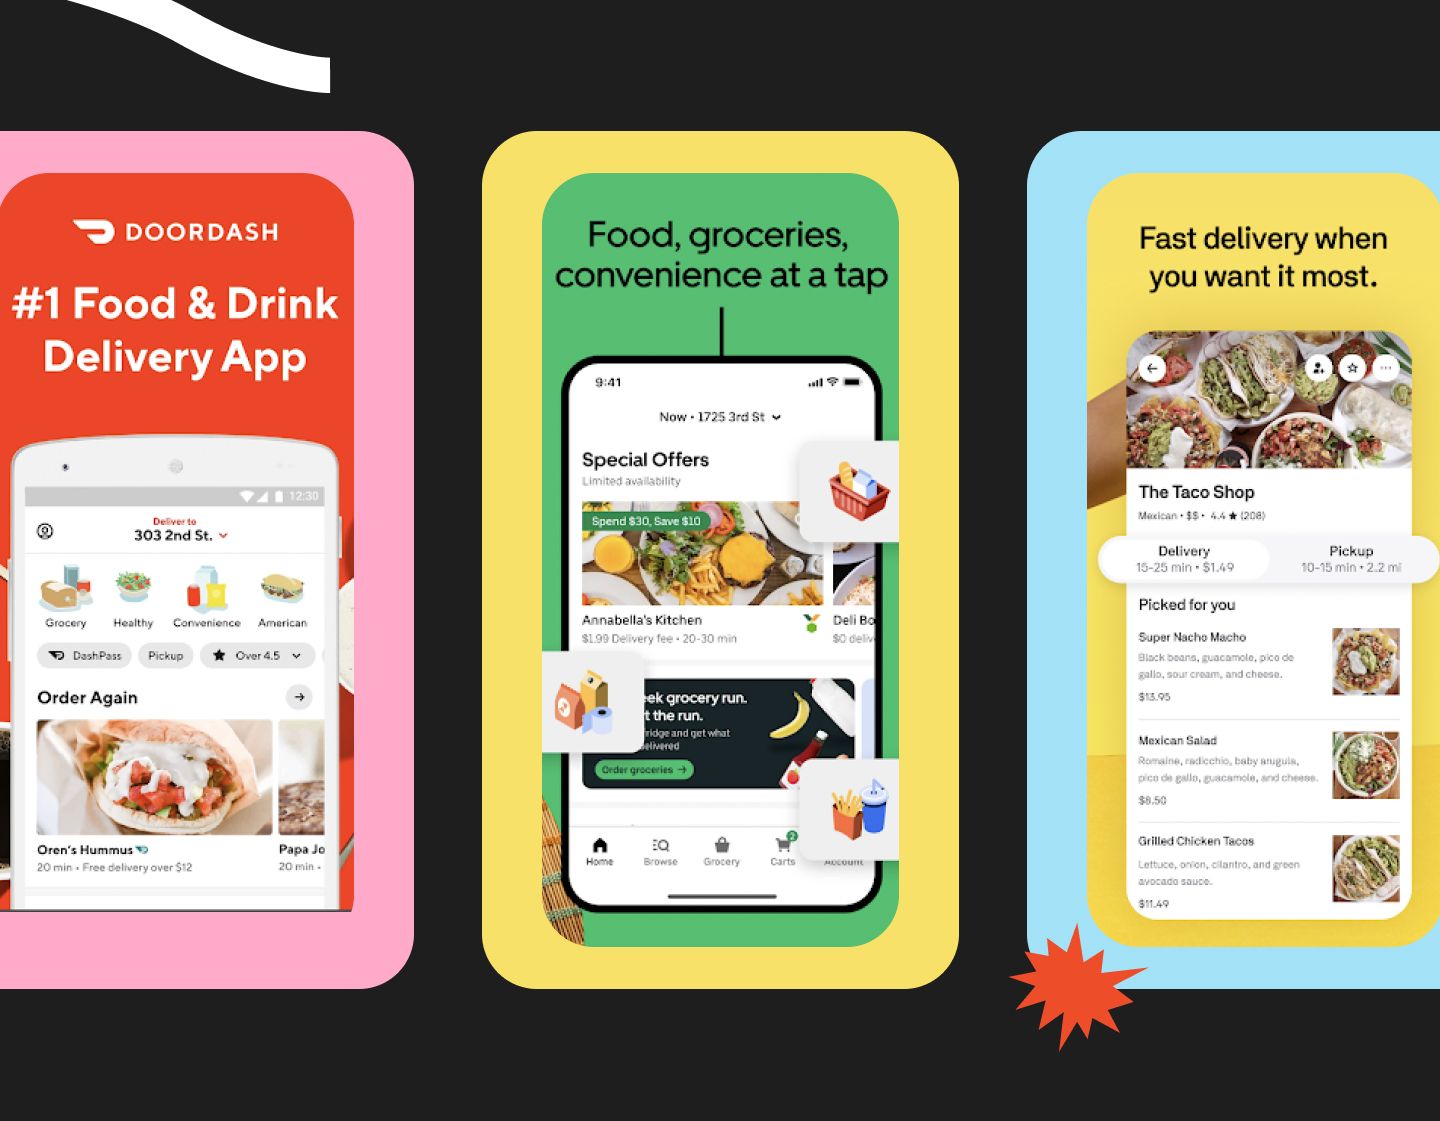 A design tip to indicate clear delivery times and costs like Postmates, DoorDash, and UberEats do